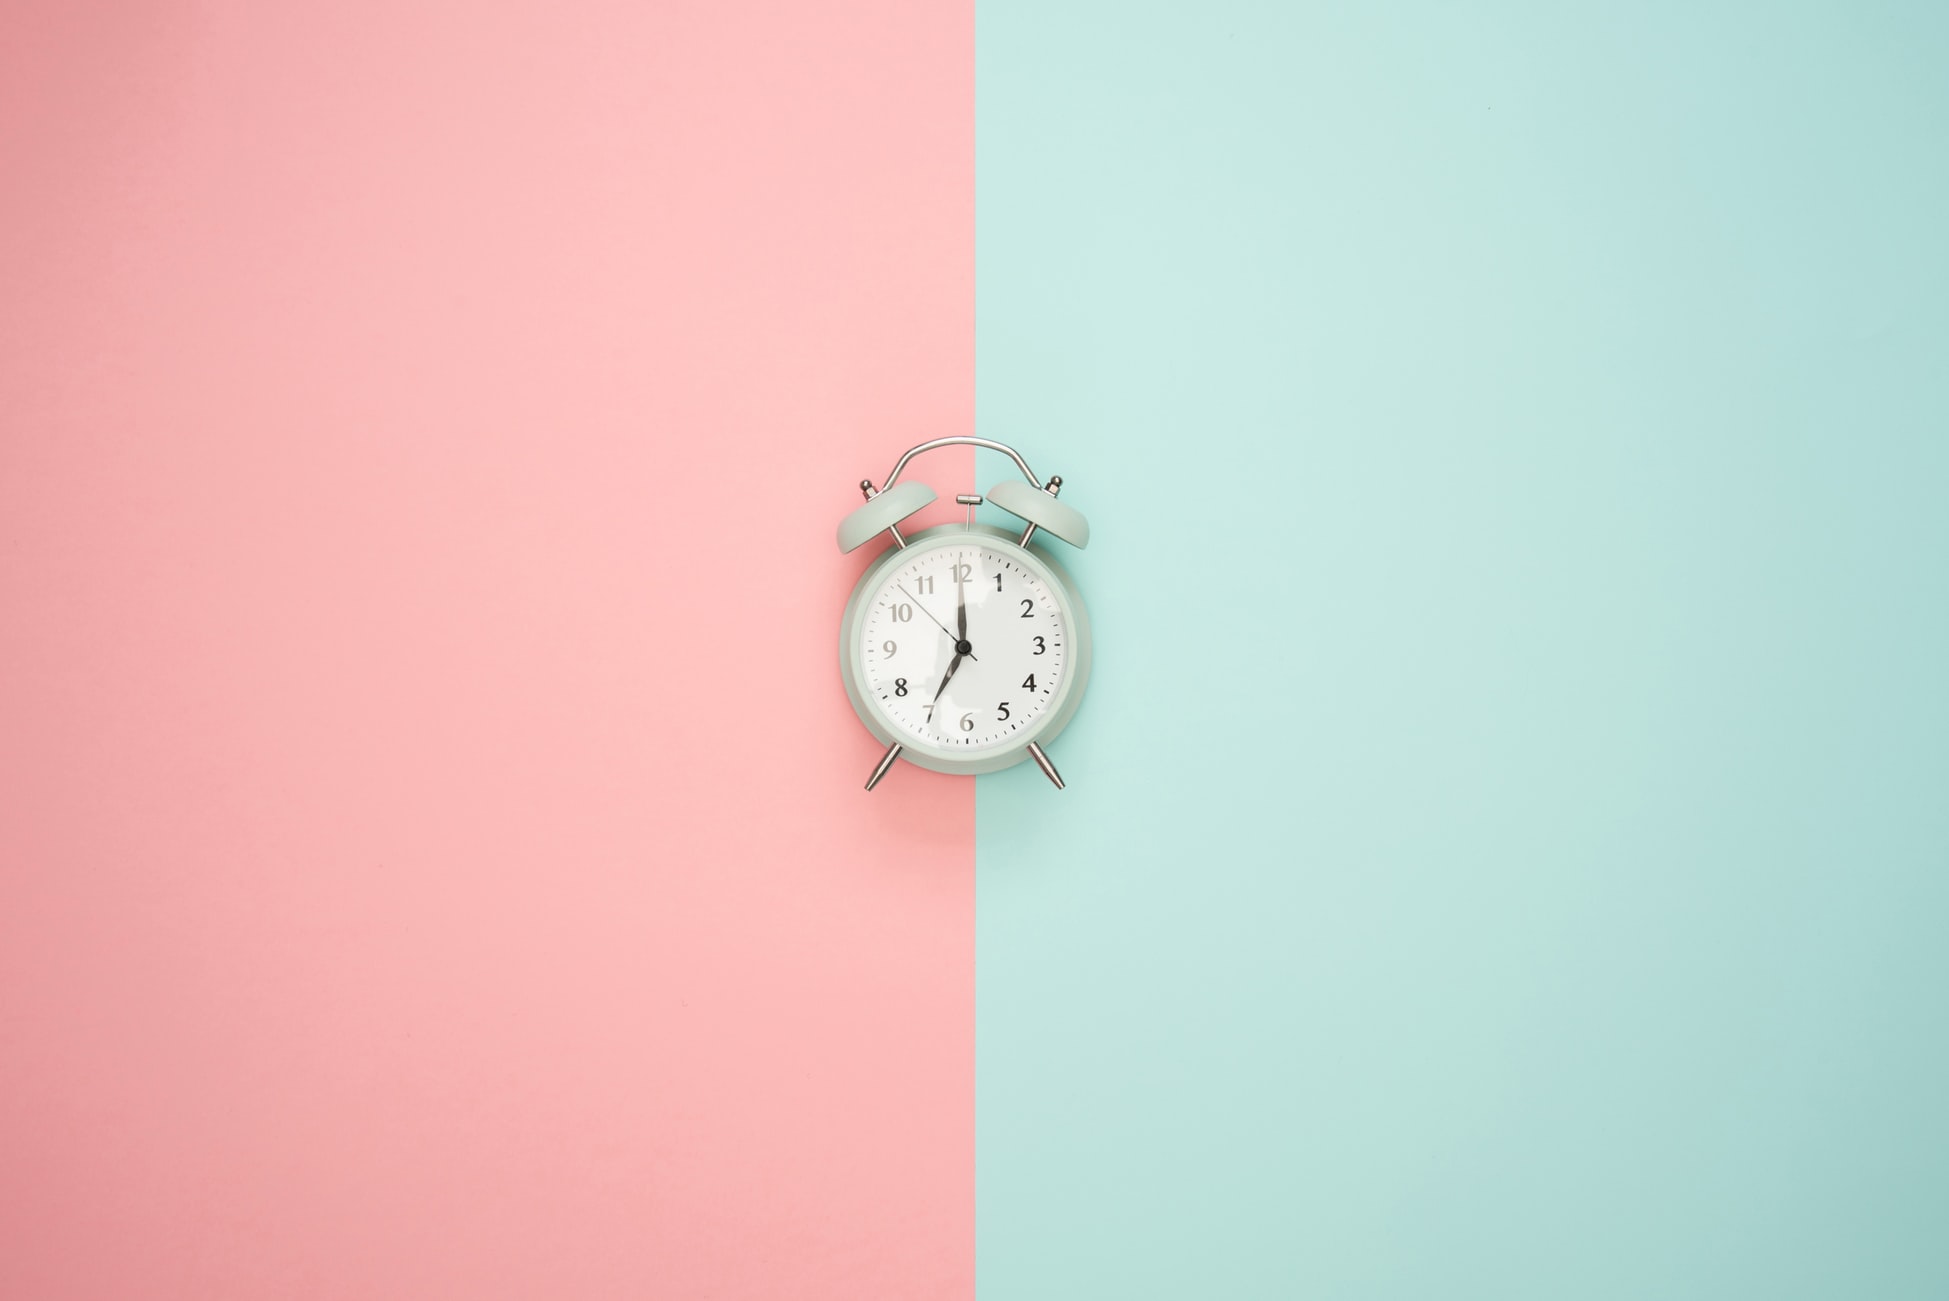 An old classic alarm clock on a pink and green background